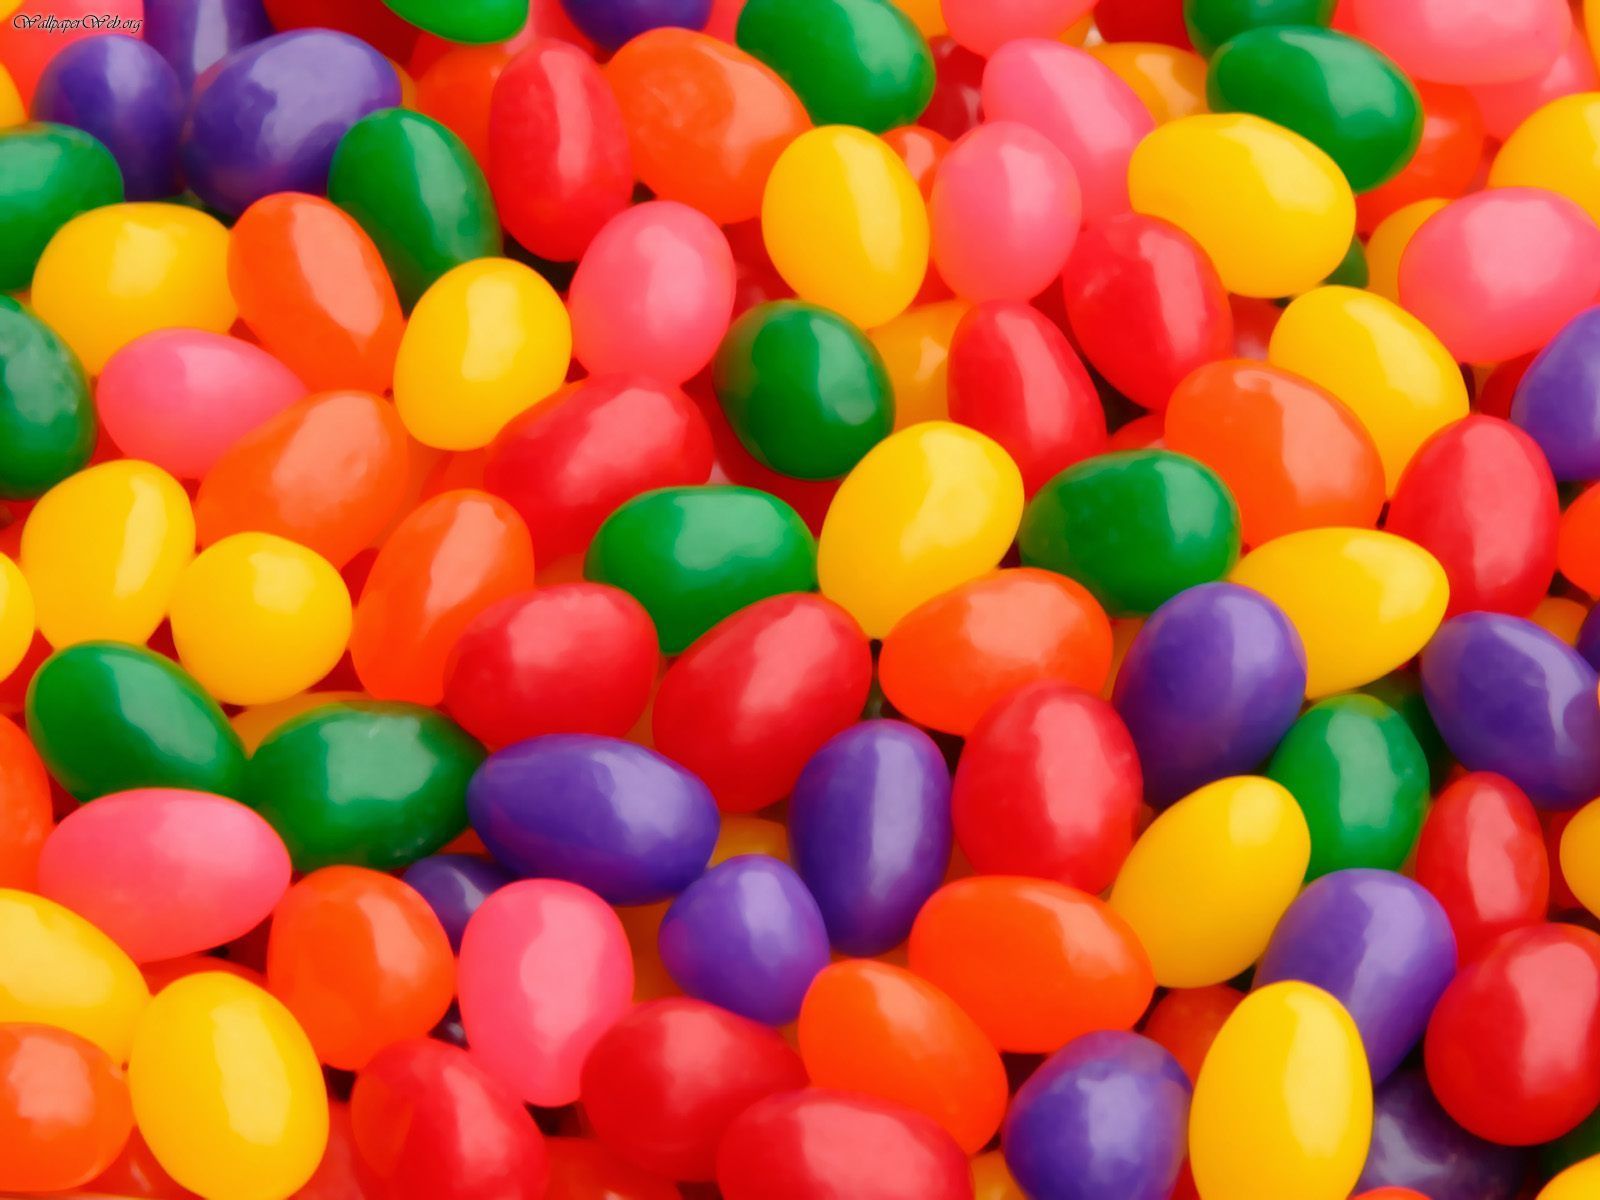 Jelly beans 1080P 2K 4K 5K HD wallpapers free download  Wallpaper Flare